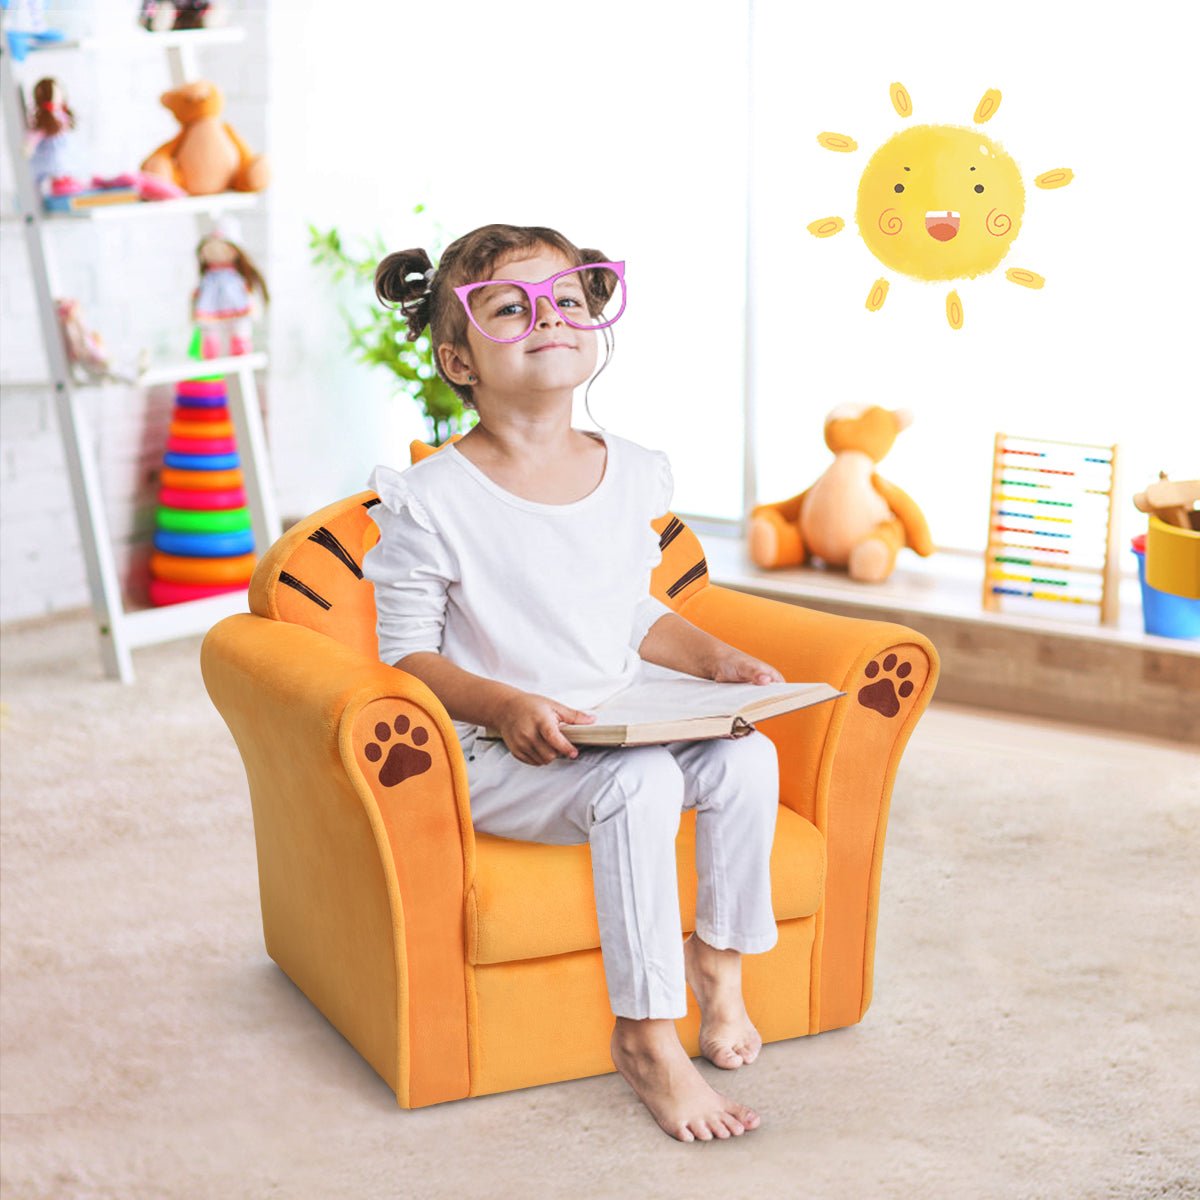 Lion Pattern Kids Armchair: Wooden Frame Comfort for Baby's Room